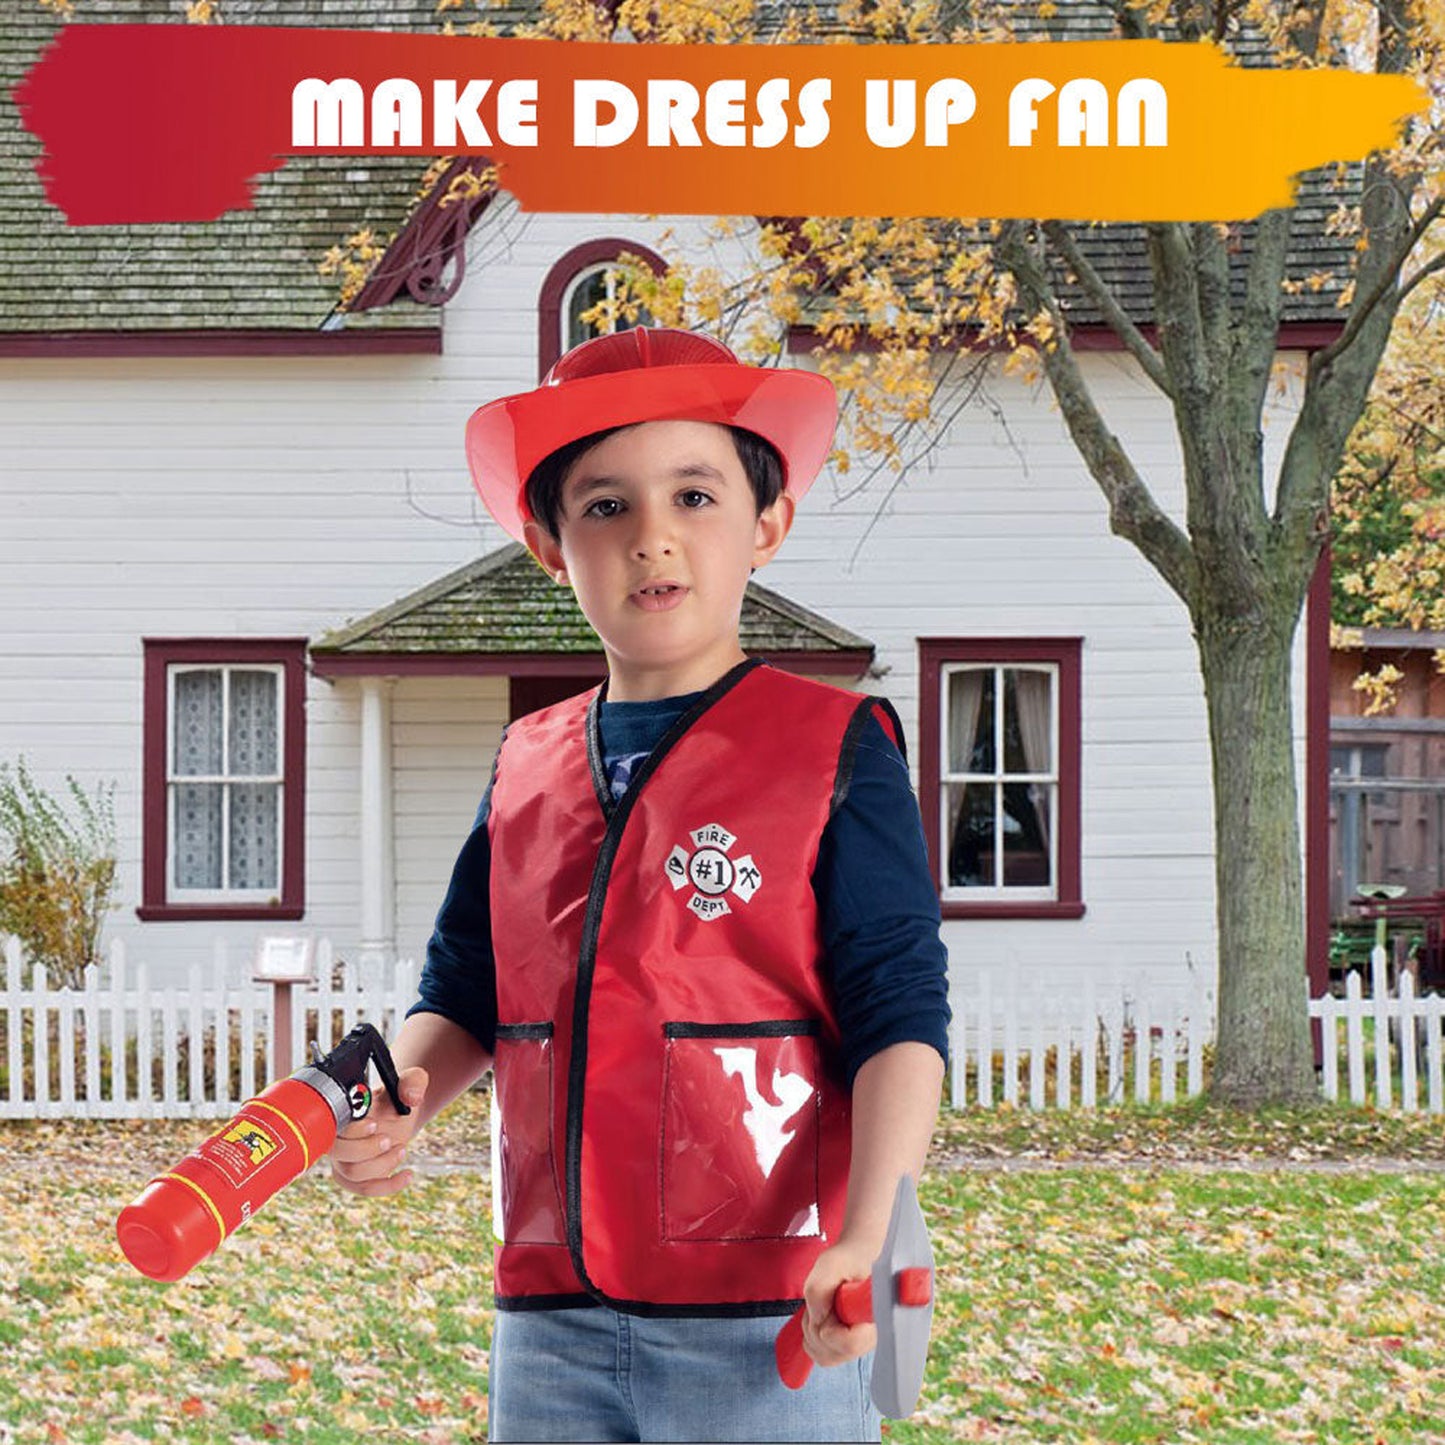 Fitto Firefighter Role Play Costume